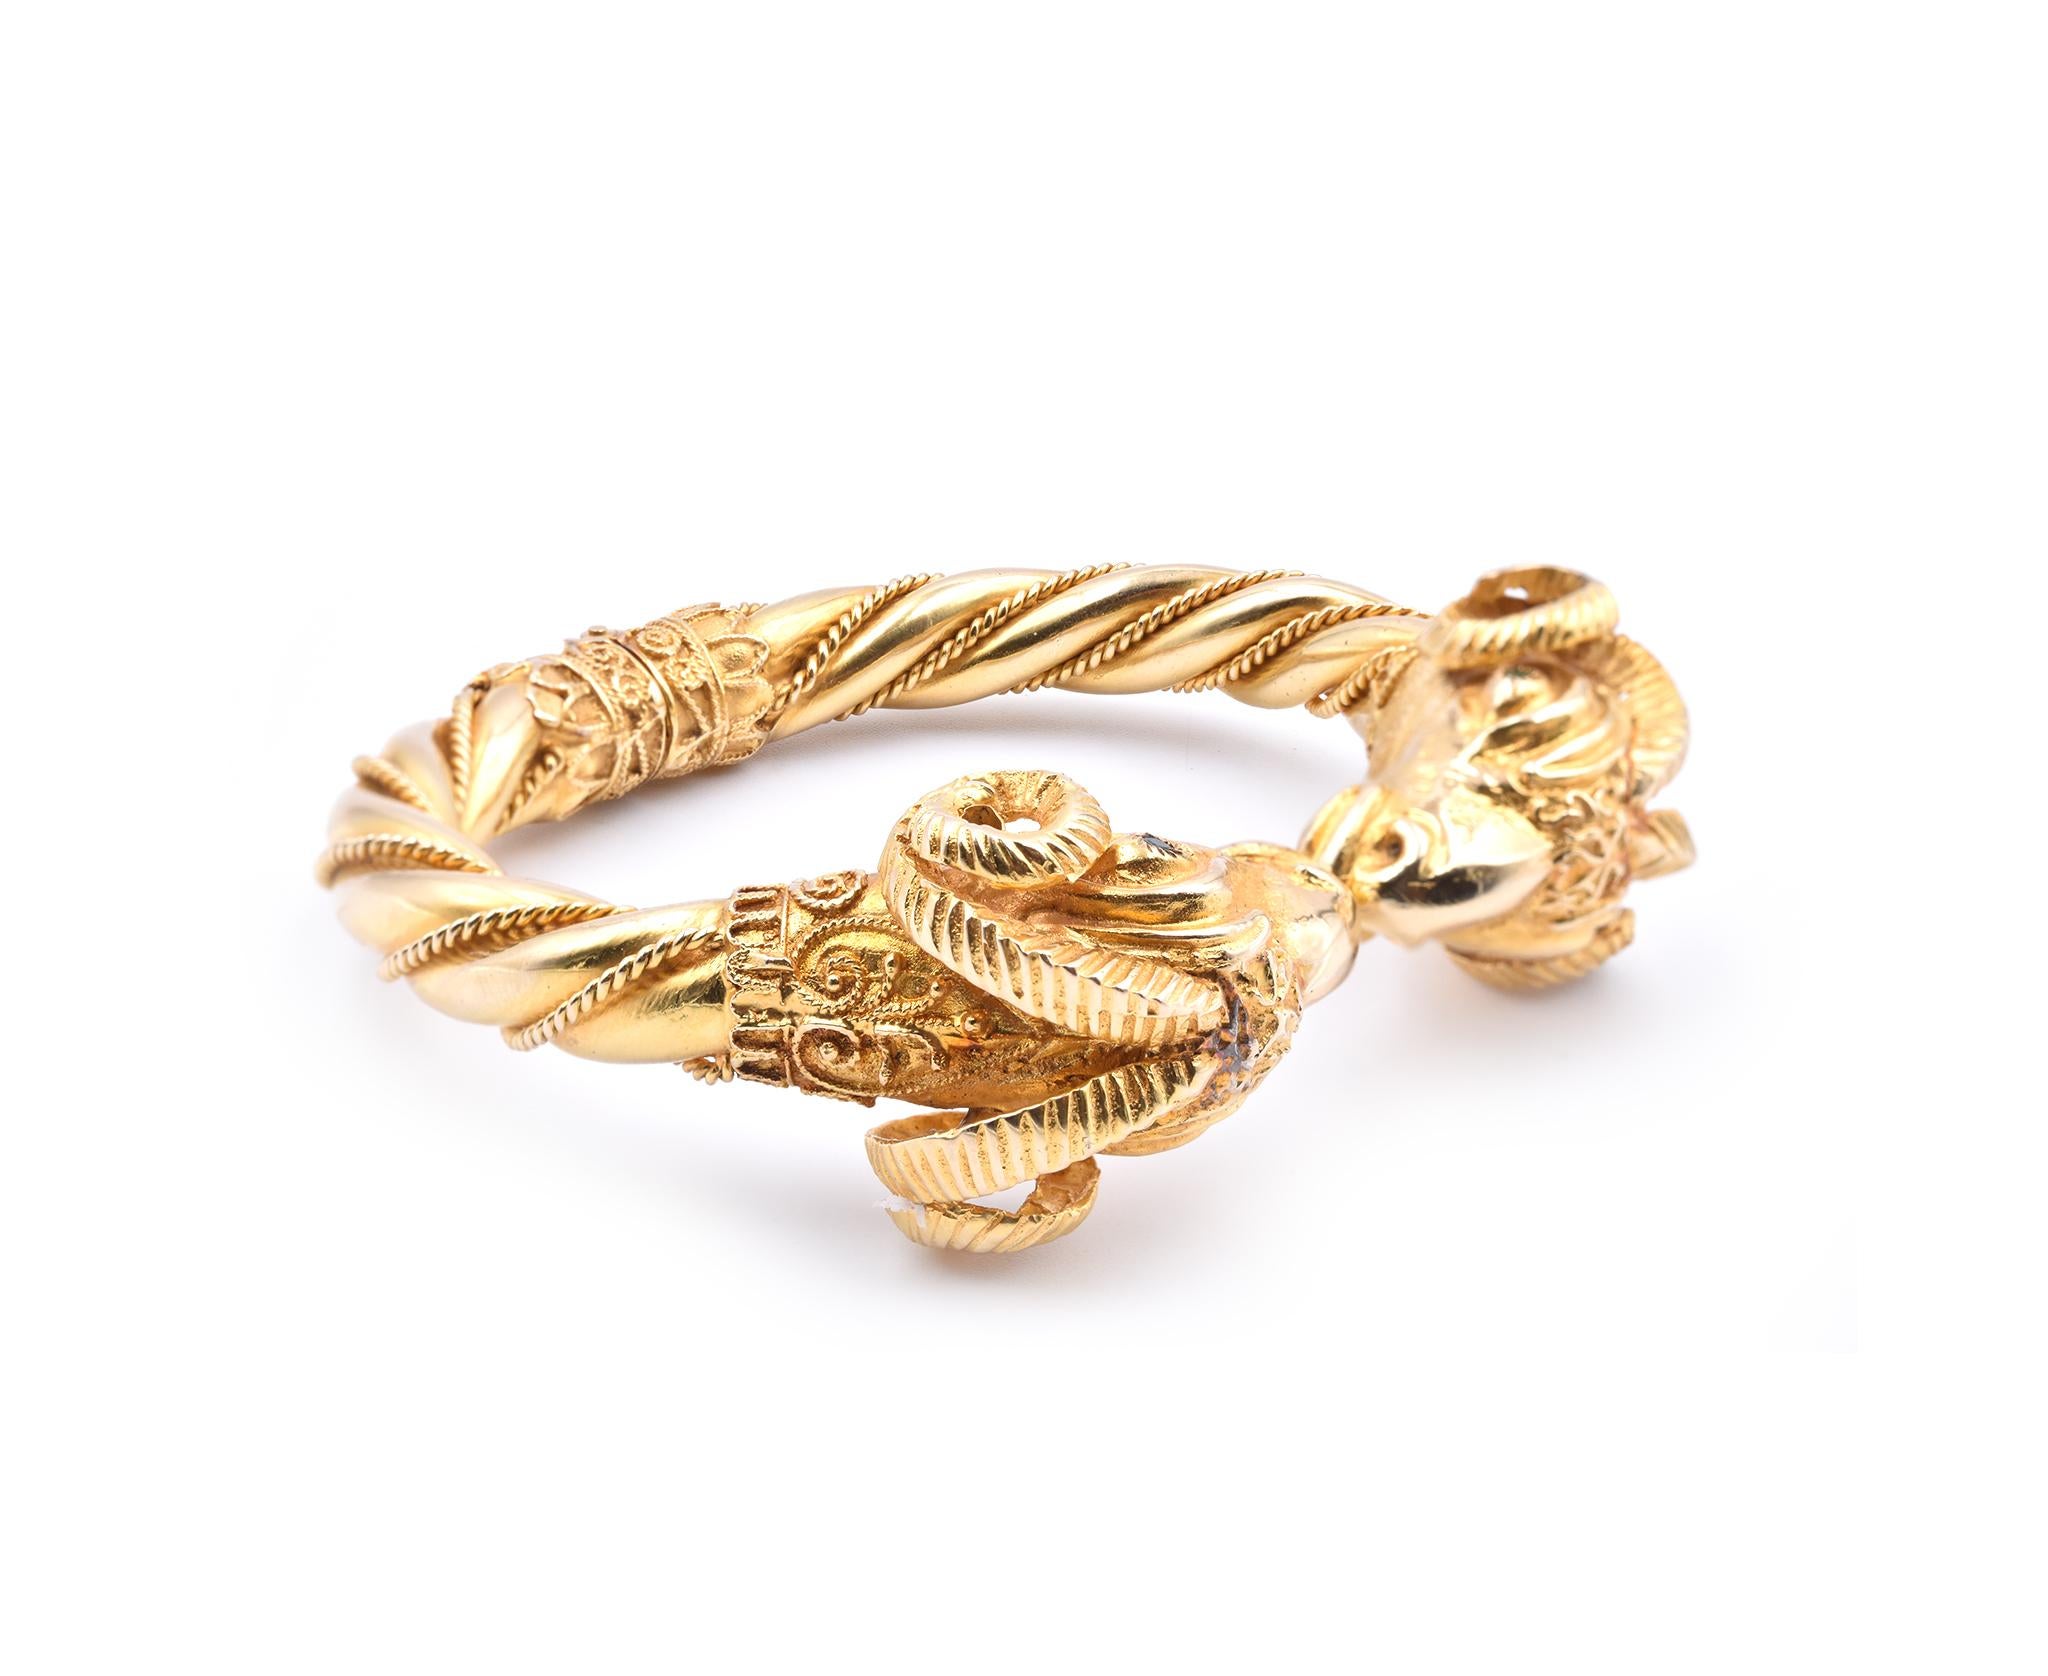 Designer: custom 
Material: 18k yellow gold
Emeralds: 4 round brilliant cuts= .08cttw
Dimensions: the bracelet will fit up to an 7.5-inch wrist
Weight: 55.49 grams
